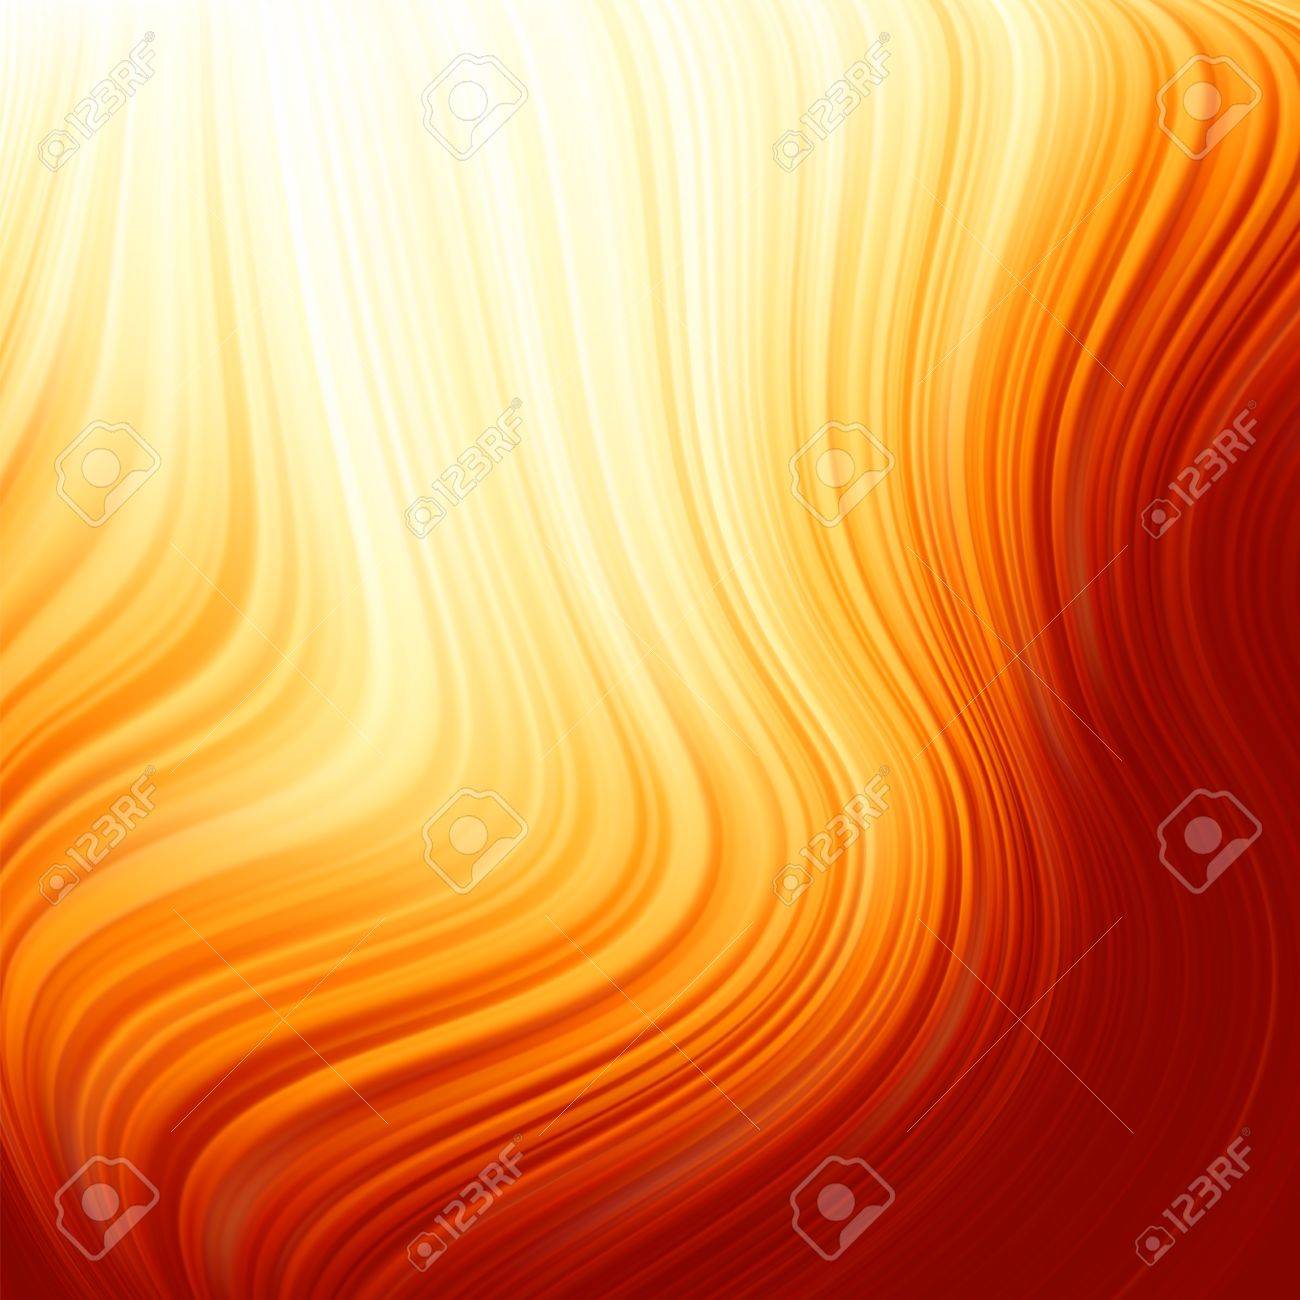 Abstract Glow Twist Background With Fire Flow Royalty